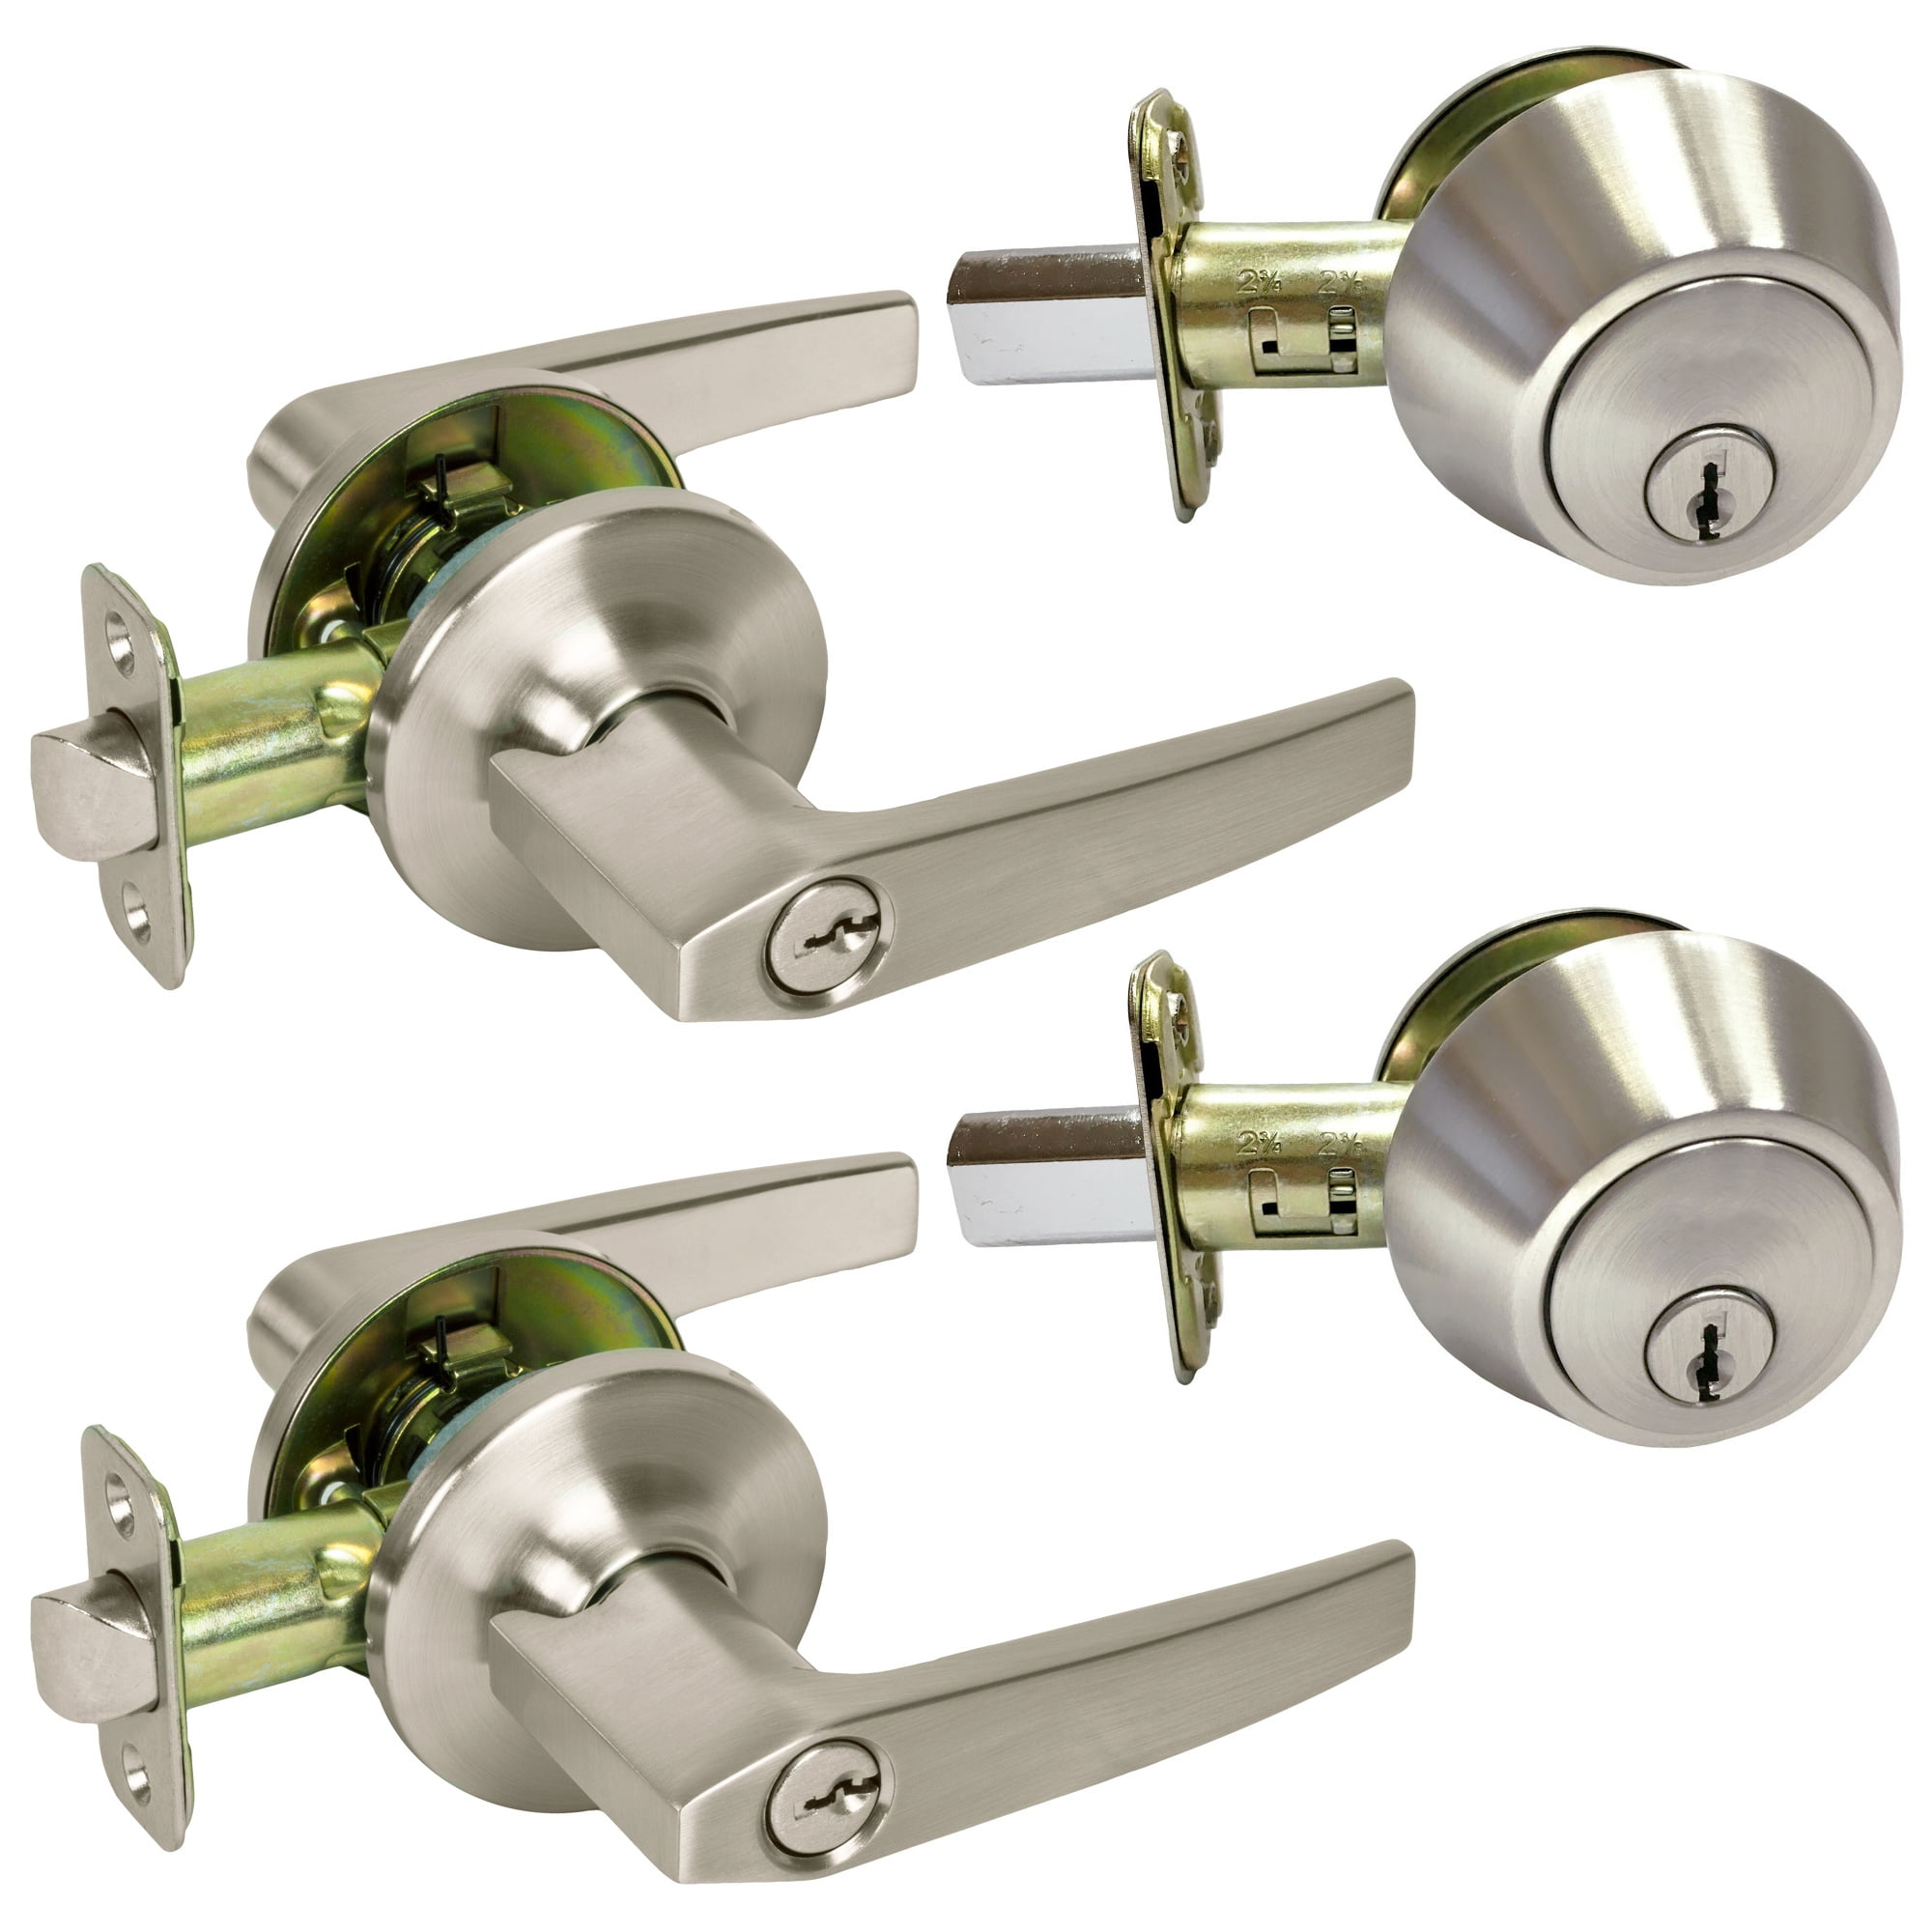 2 Pack of Contemporary Lever Keyed Entry Door Locks with Single Cylinder Deadbolts Combo, Satin